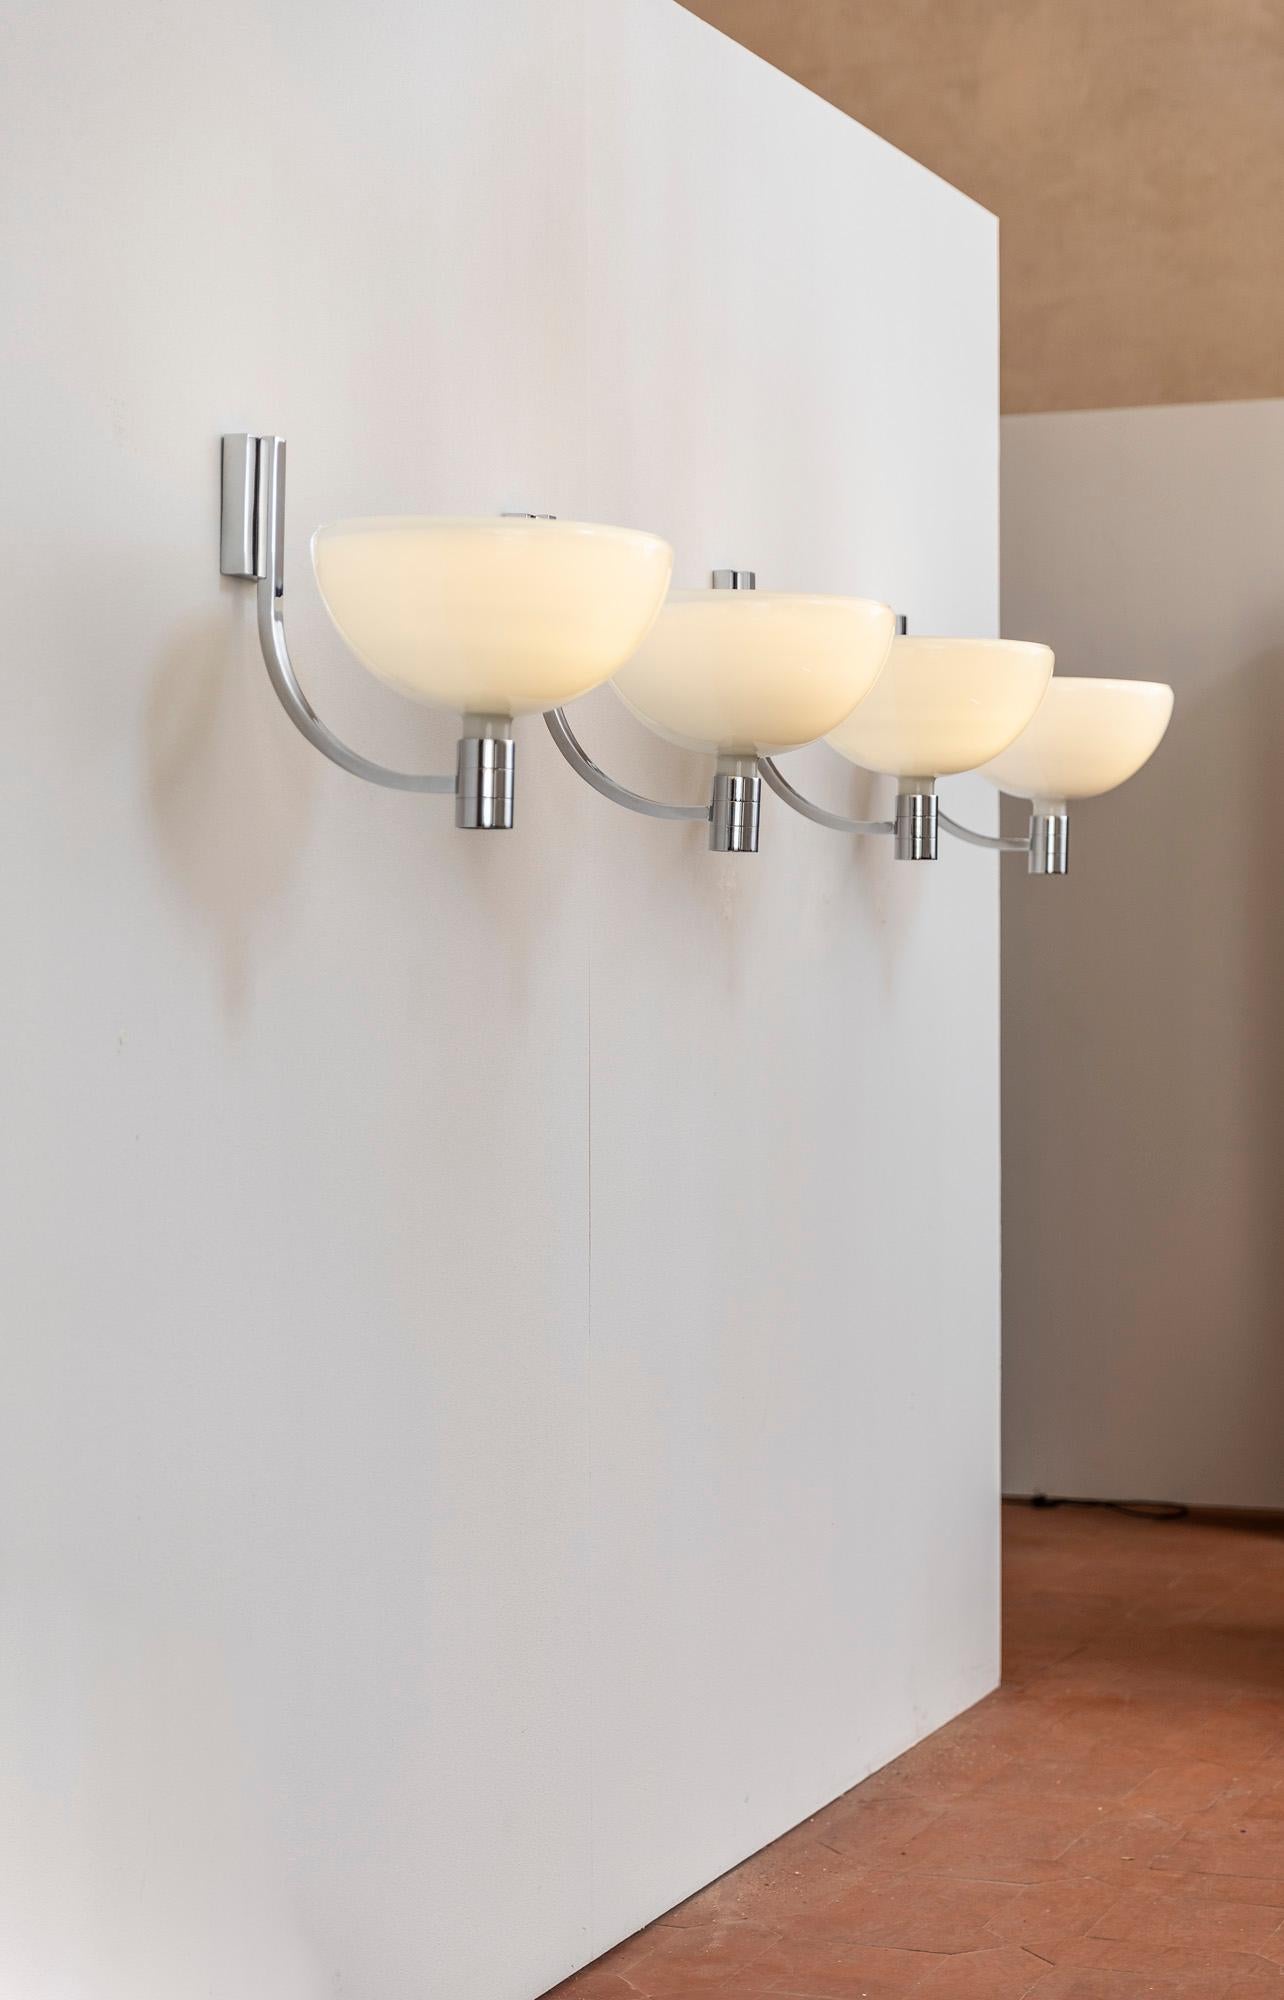 Set of midcentury Italian Wall Lights  by Franco Albini for Sirrah, 1968  In Excellent Condition For Sale In Piacenza, Italy